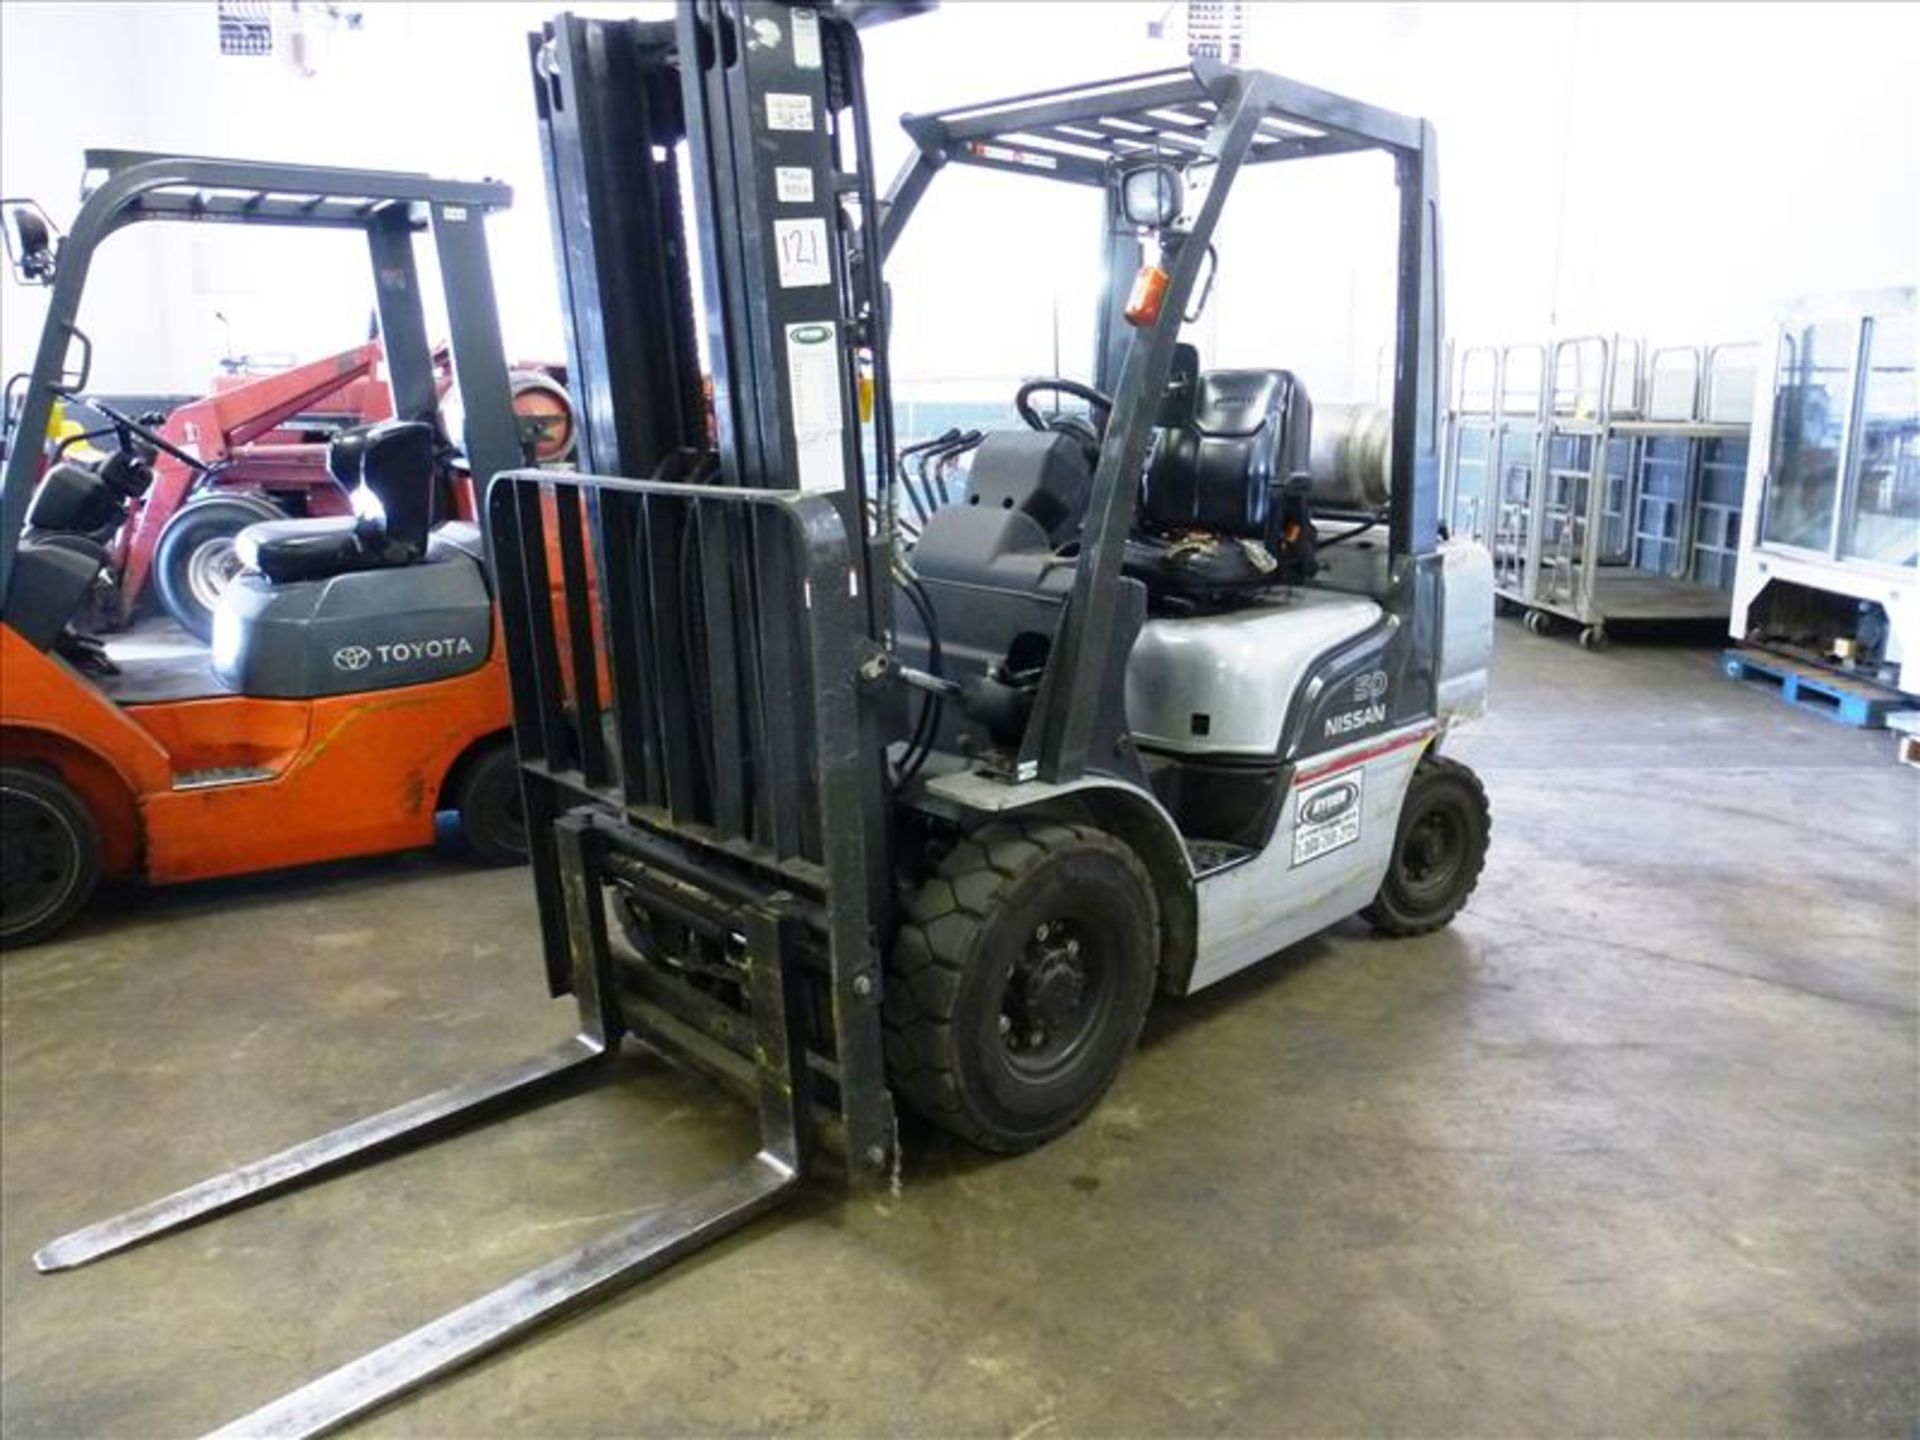 Nissan forklift truck, mod. MP1F2A25LV, ser. no. P1F2-9H1938, 4000 lbs. cap., side-shift, 3-stage